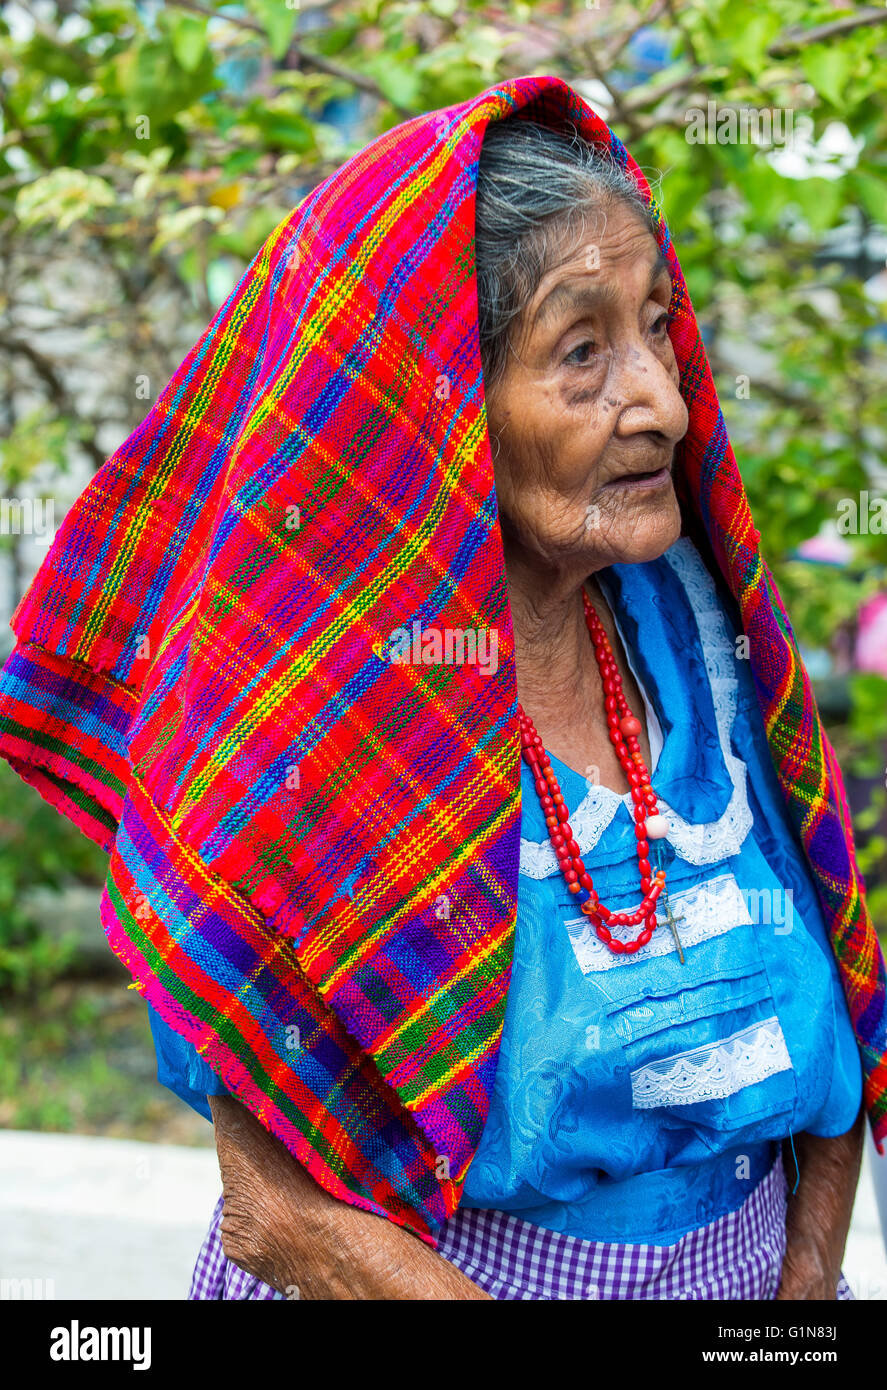 Portrait of an Salvadoran woman during the Flower & Palm Festival in Panchimalco, El Salvador Stock Photo